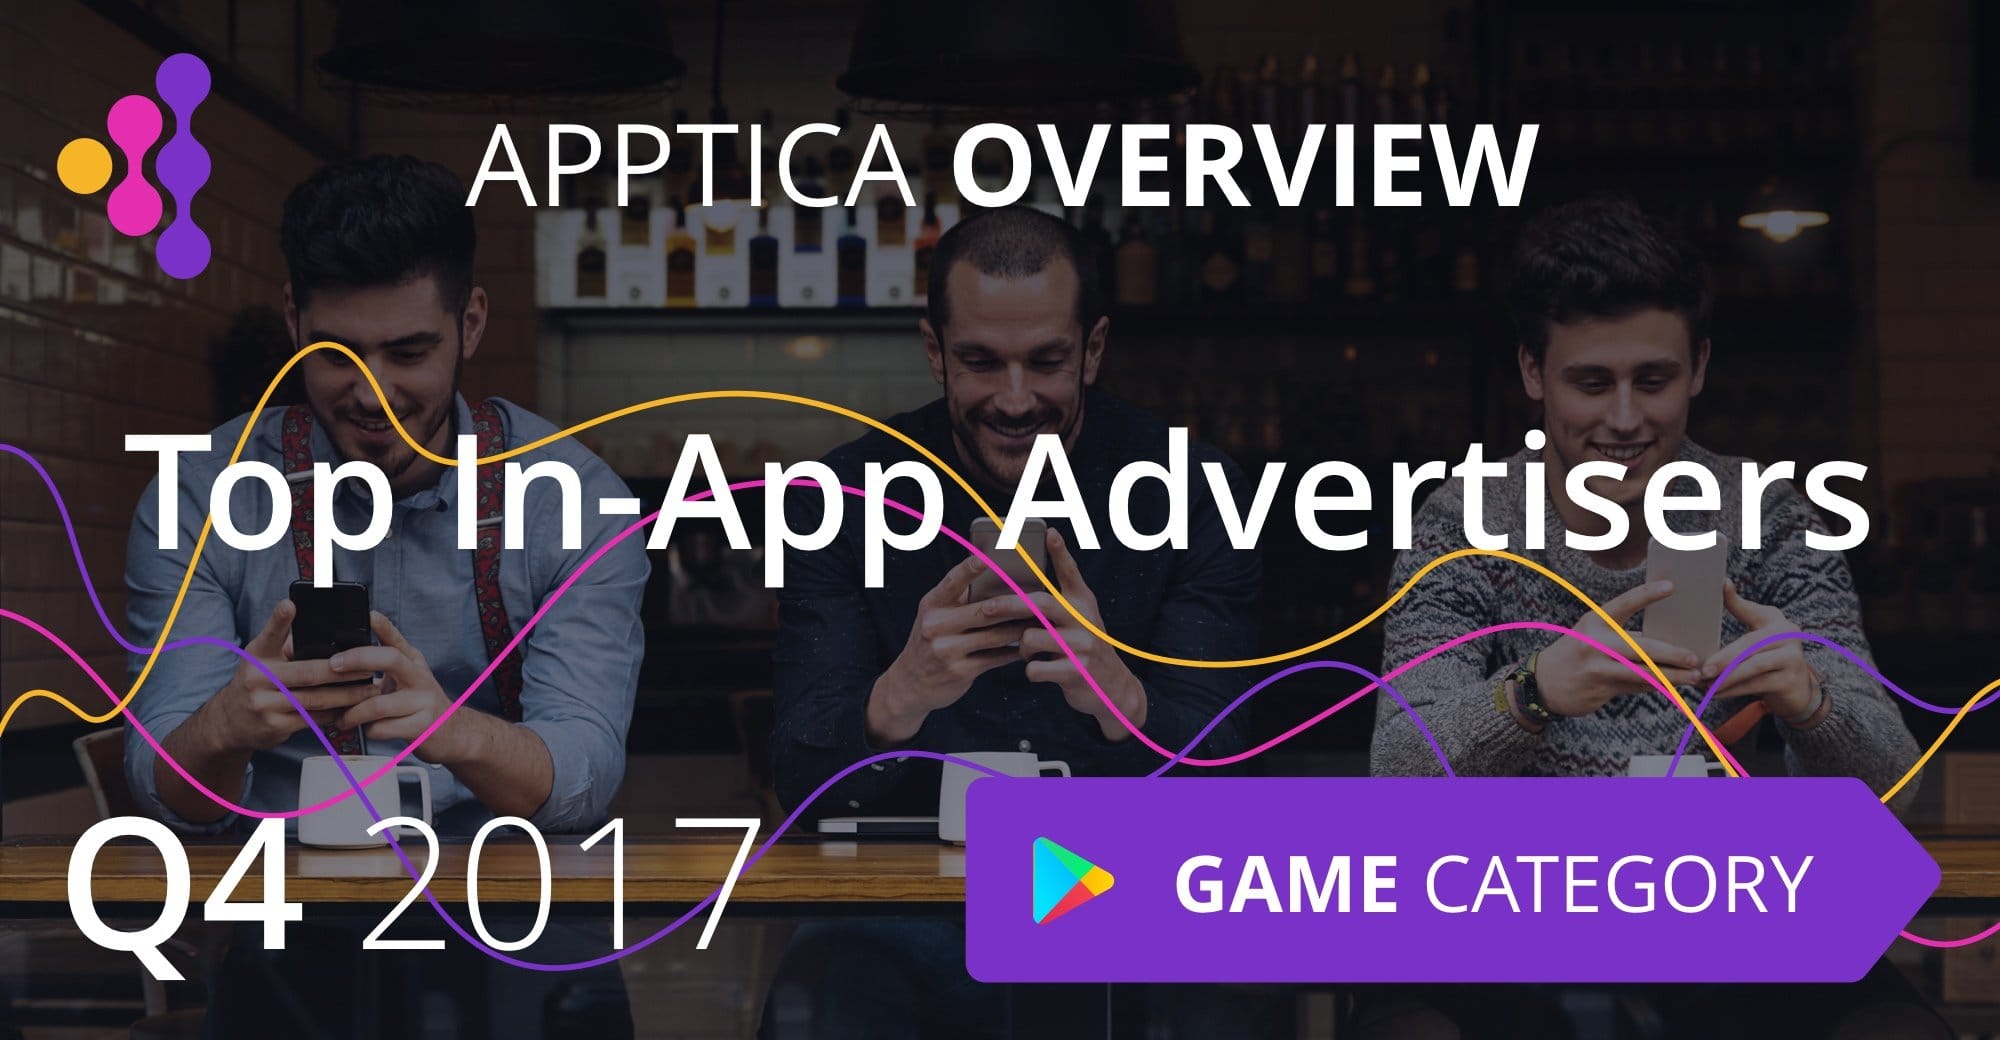 Top In-App Advertisers of Q4 2017, Android, Game Category. Apptica Overview.